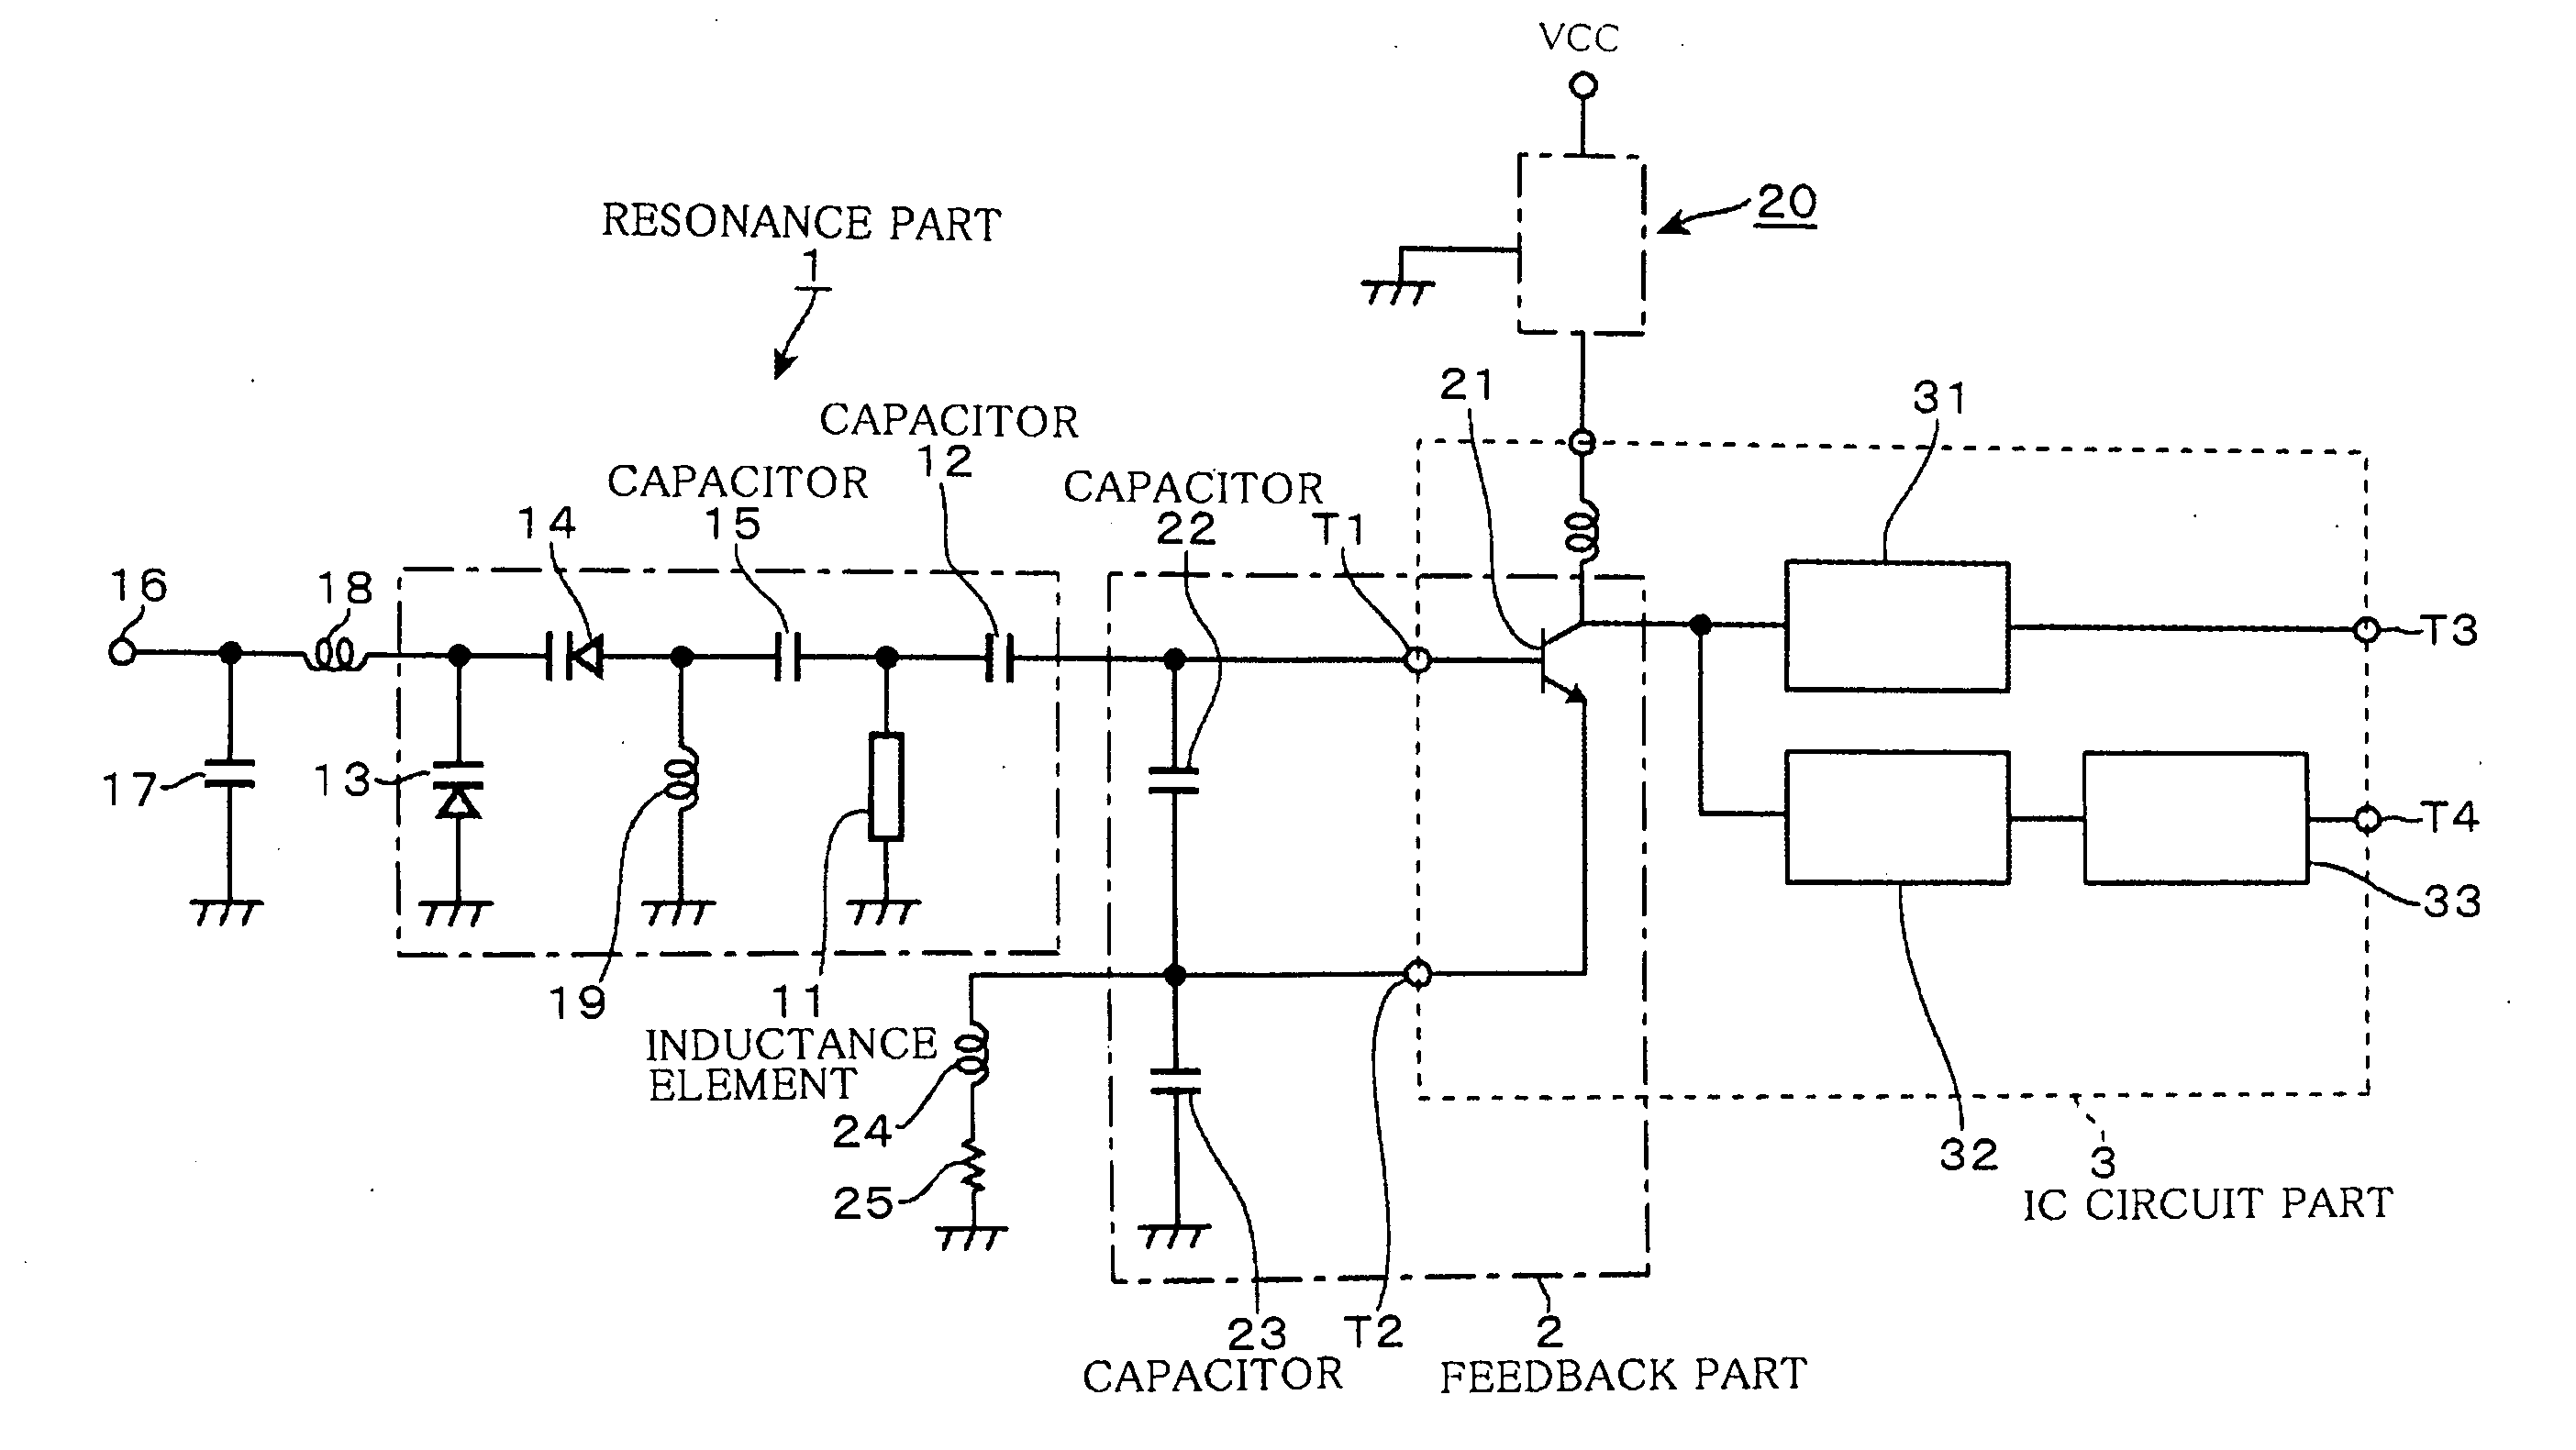 Voltage controlled oscillator and electronic component